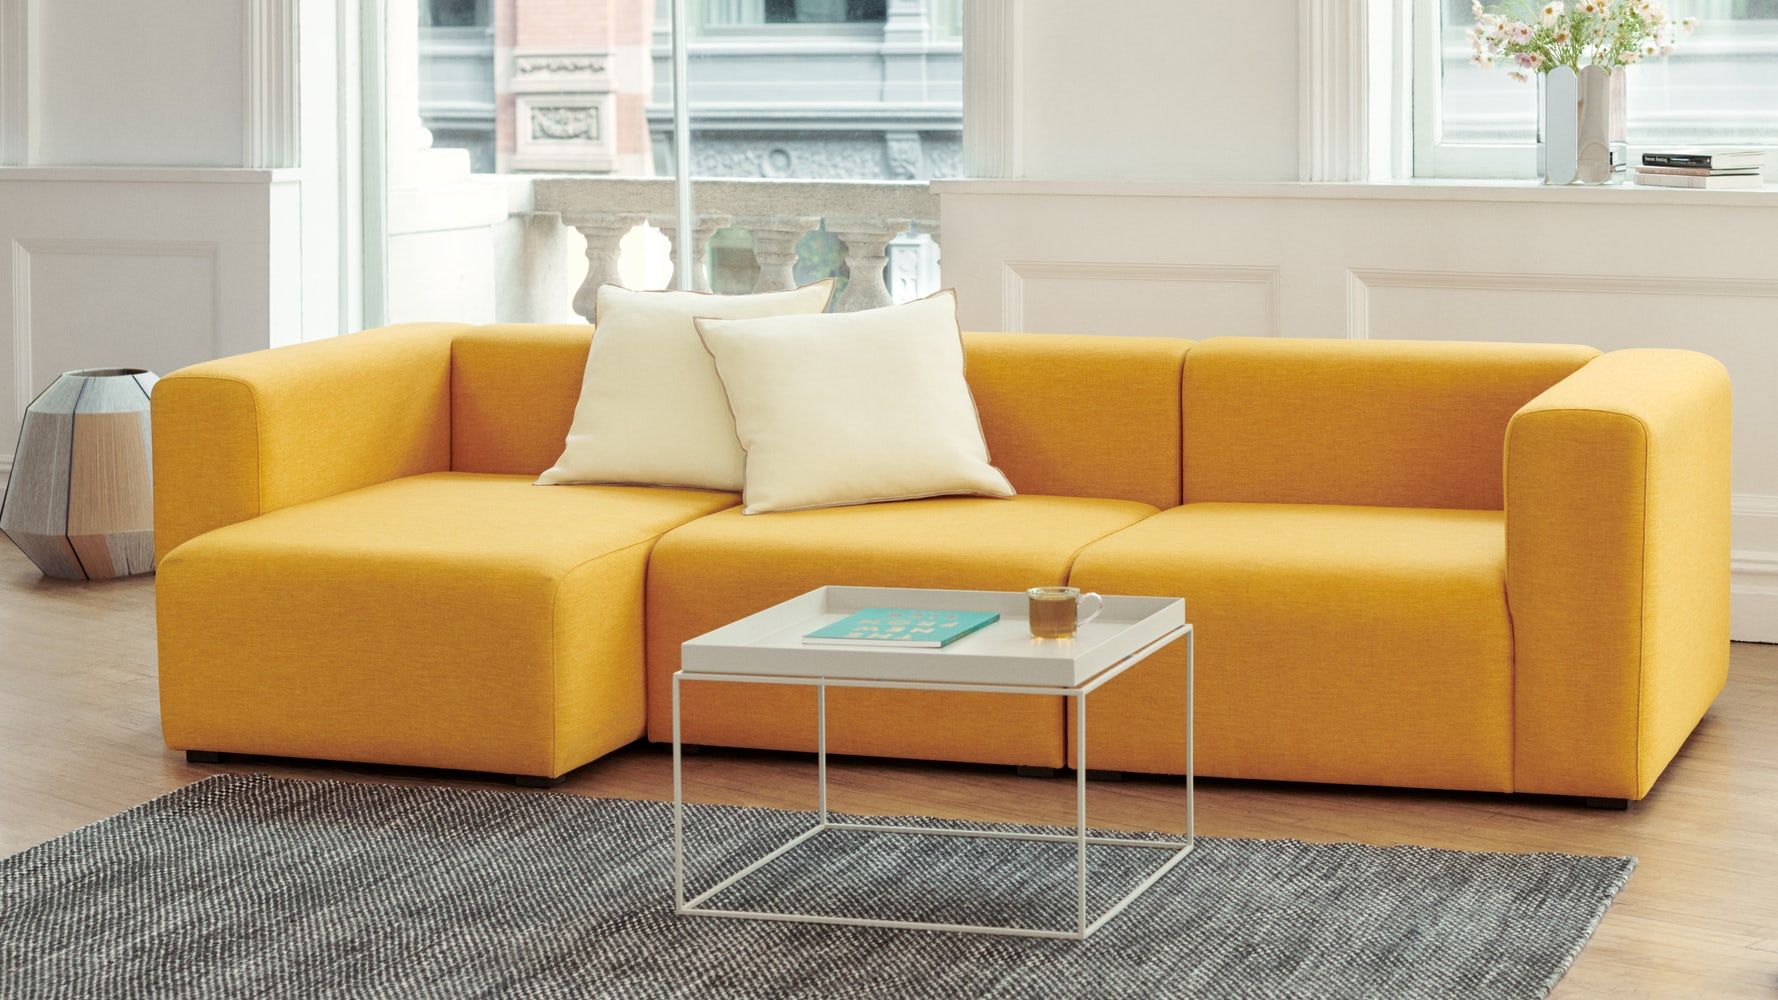 Rectangle Glass Coffee Table Tea Cocktail Table with Metal Frame Living Room 